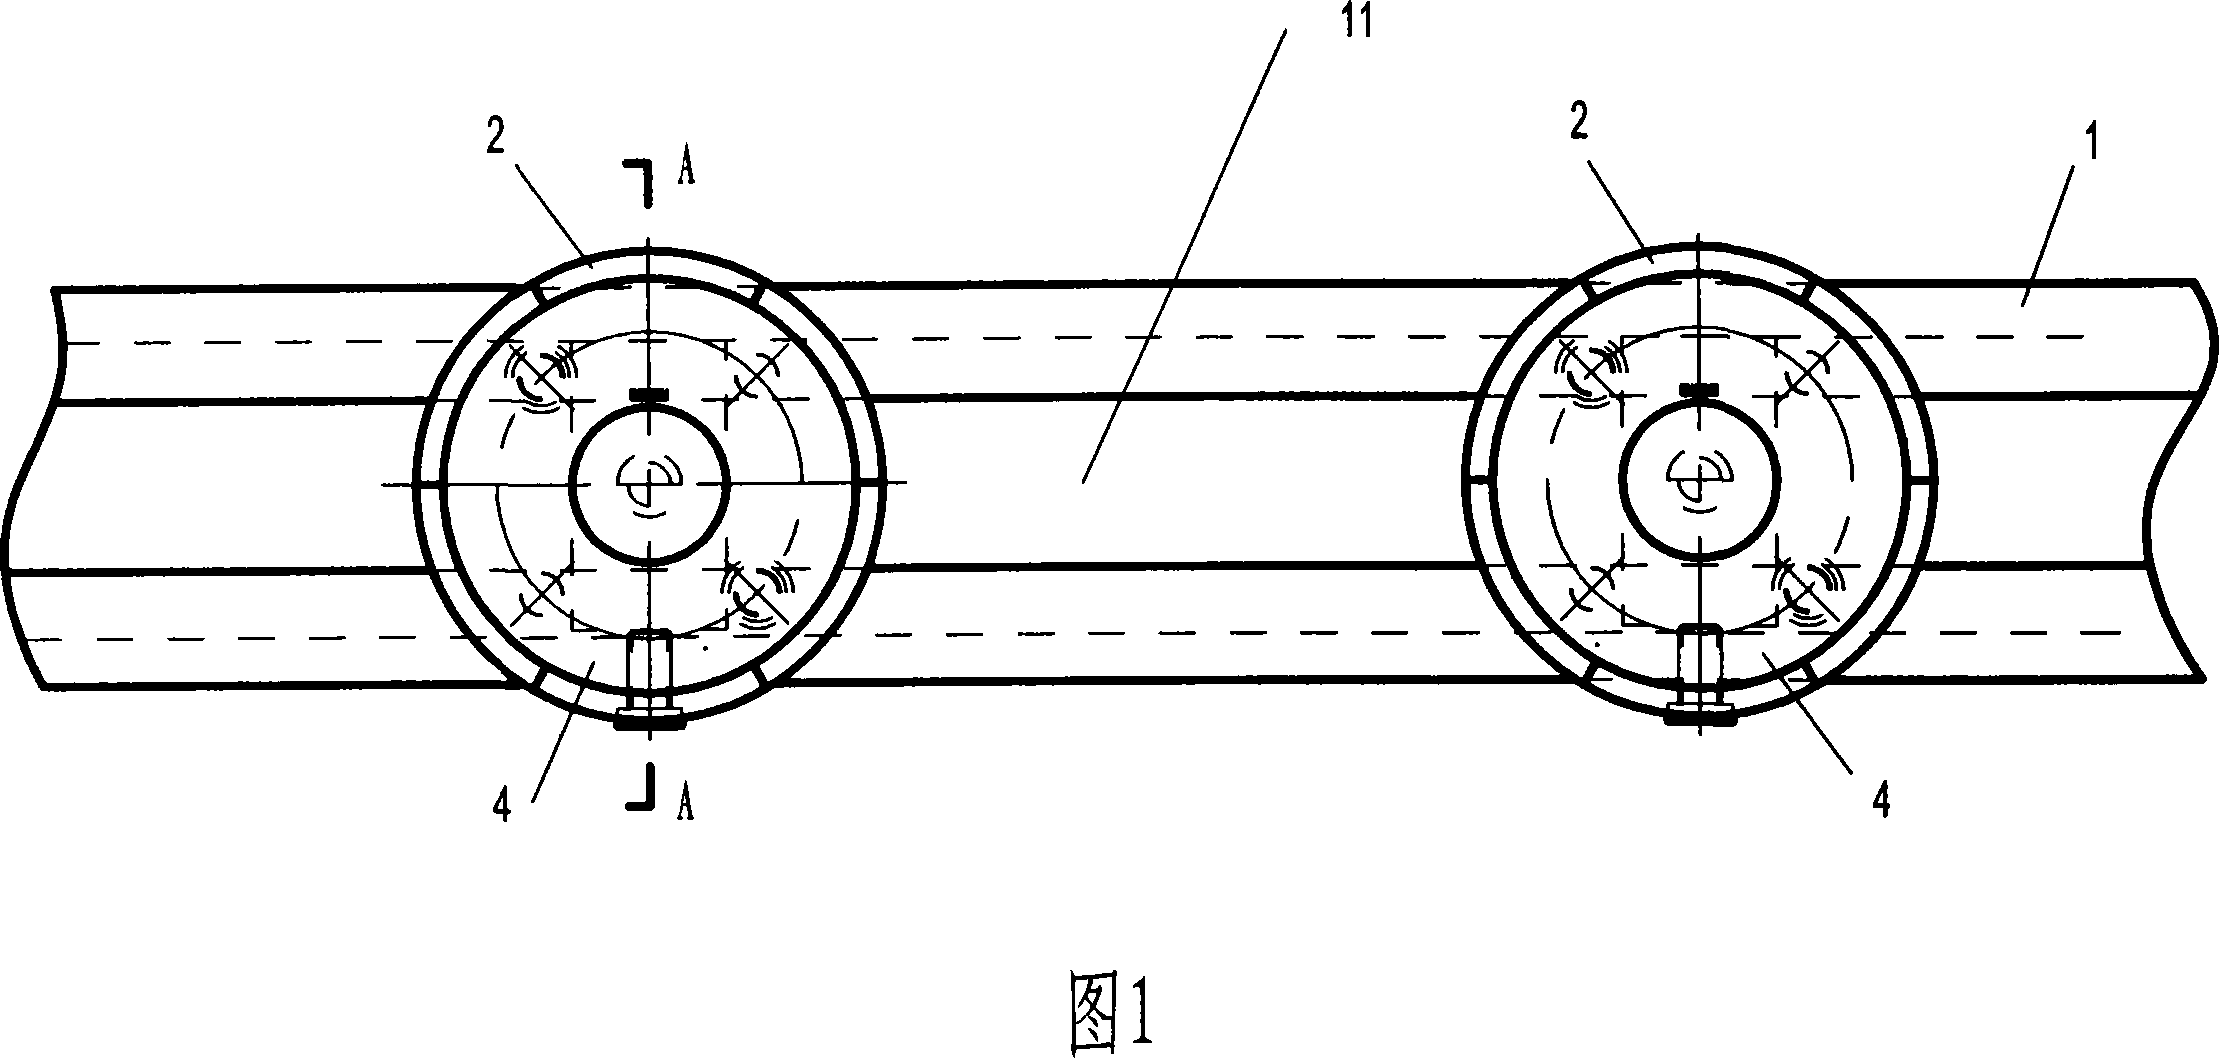 Welding aid for connecting flange and its welding method